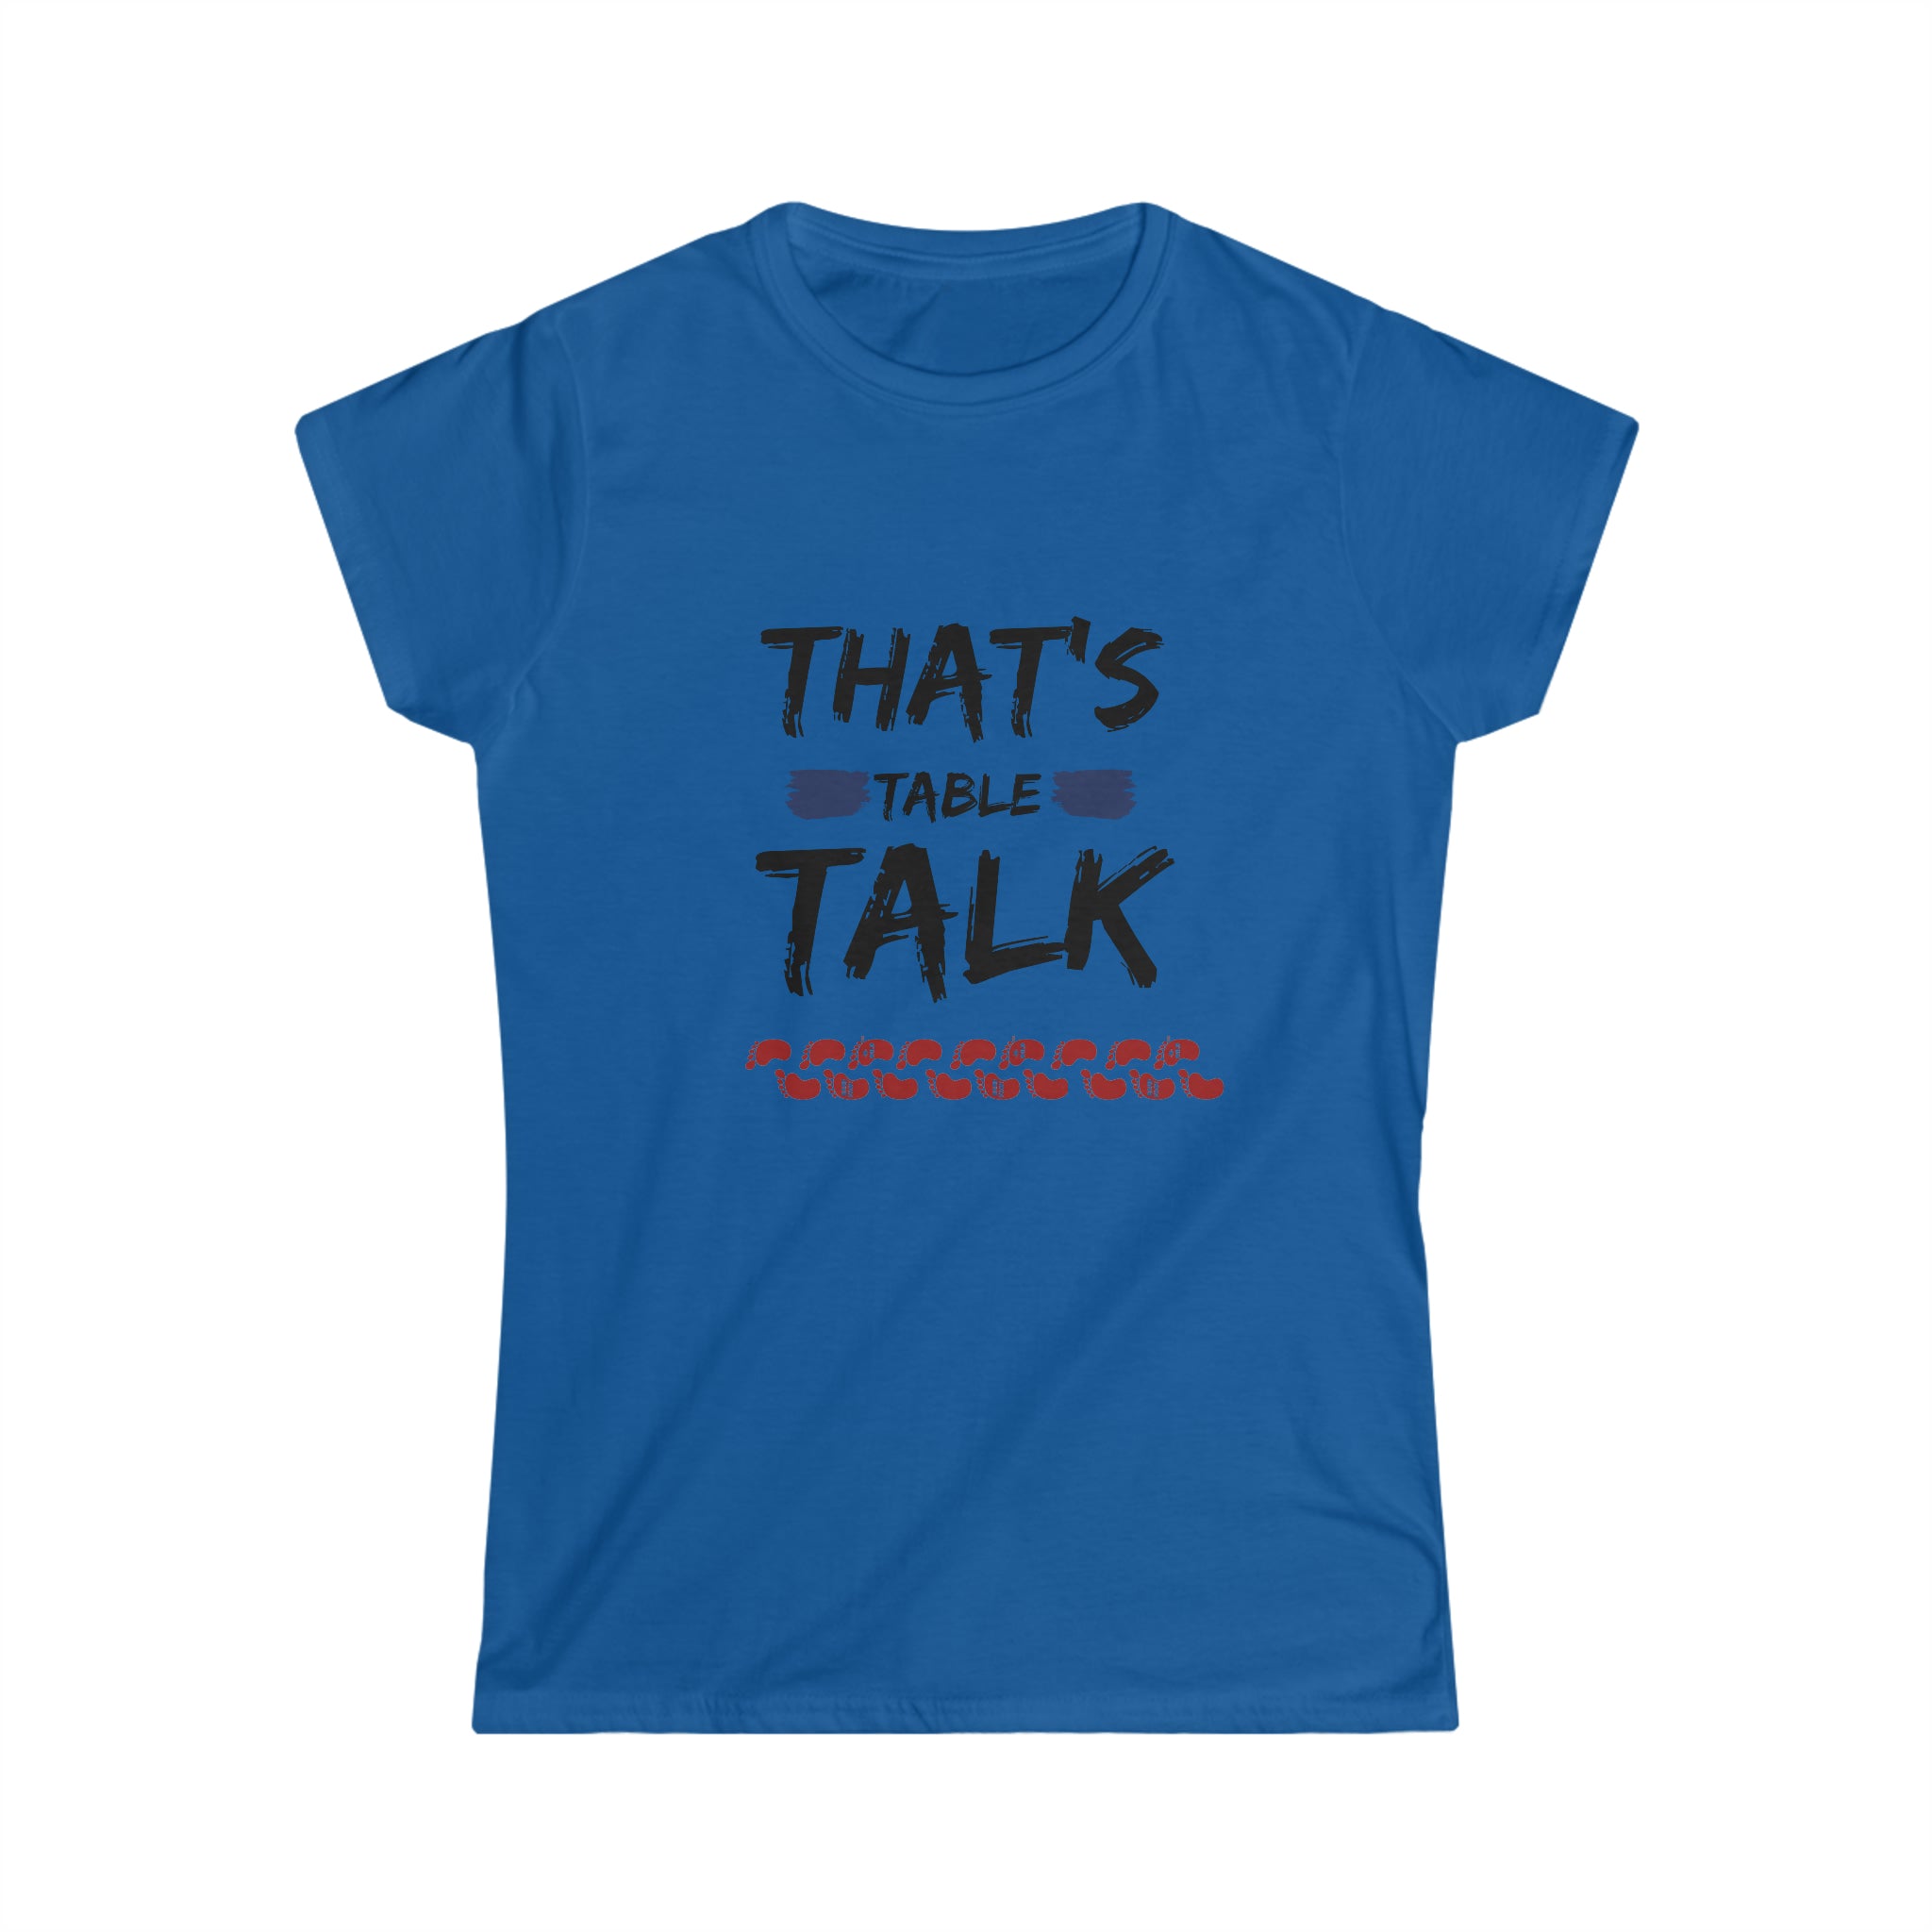 That's Table Talk - Women's Softstyle Tee